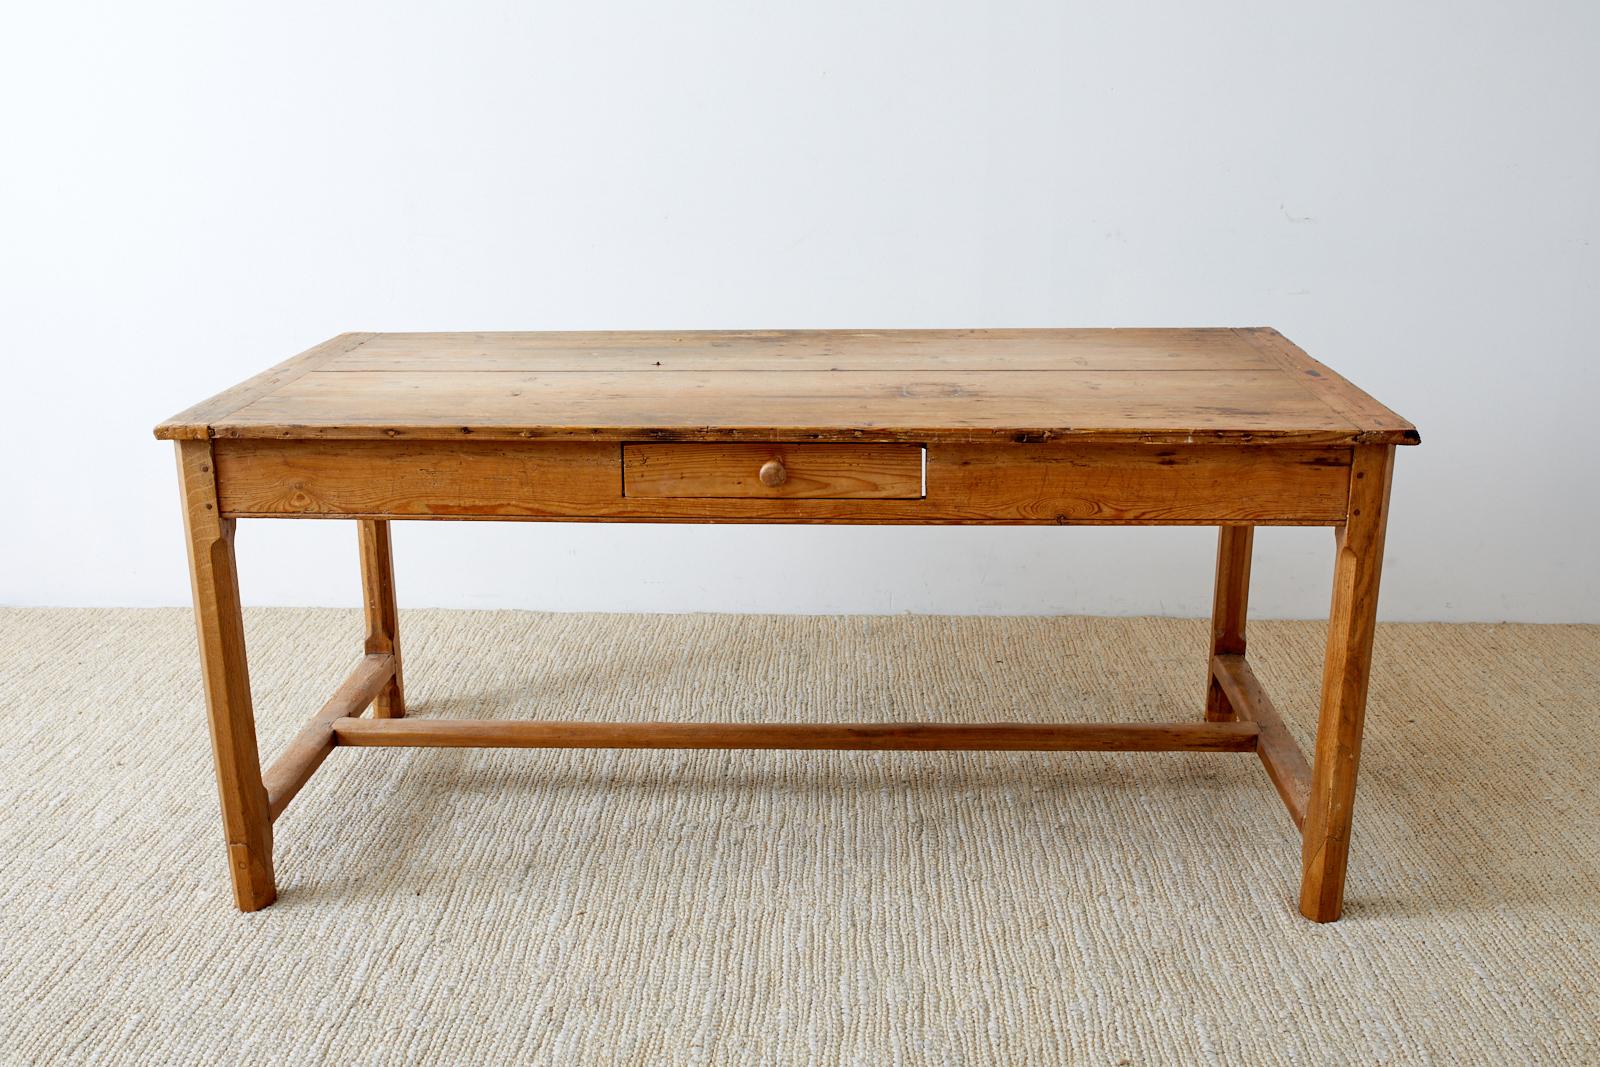 Hand-Crafted 19th Century American Pine Farmhouse Dining or Writing Table